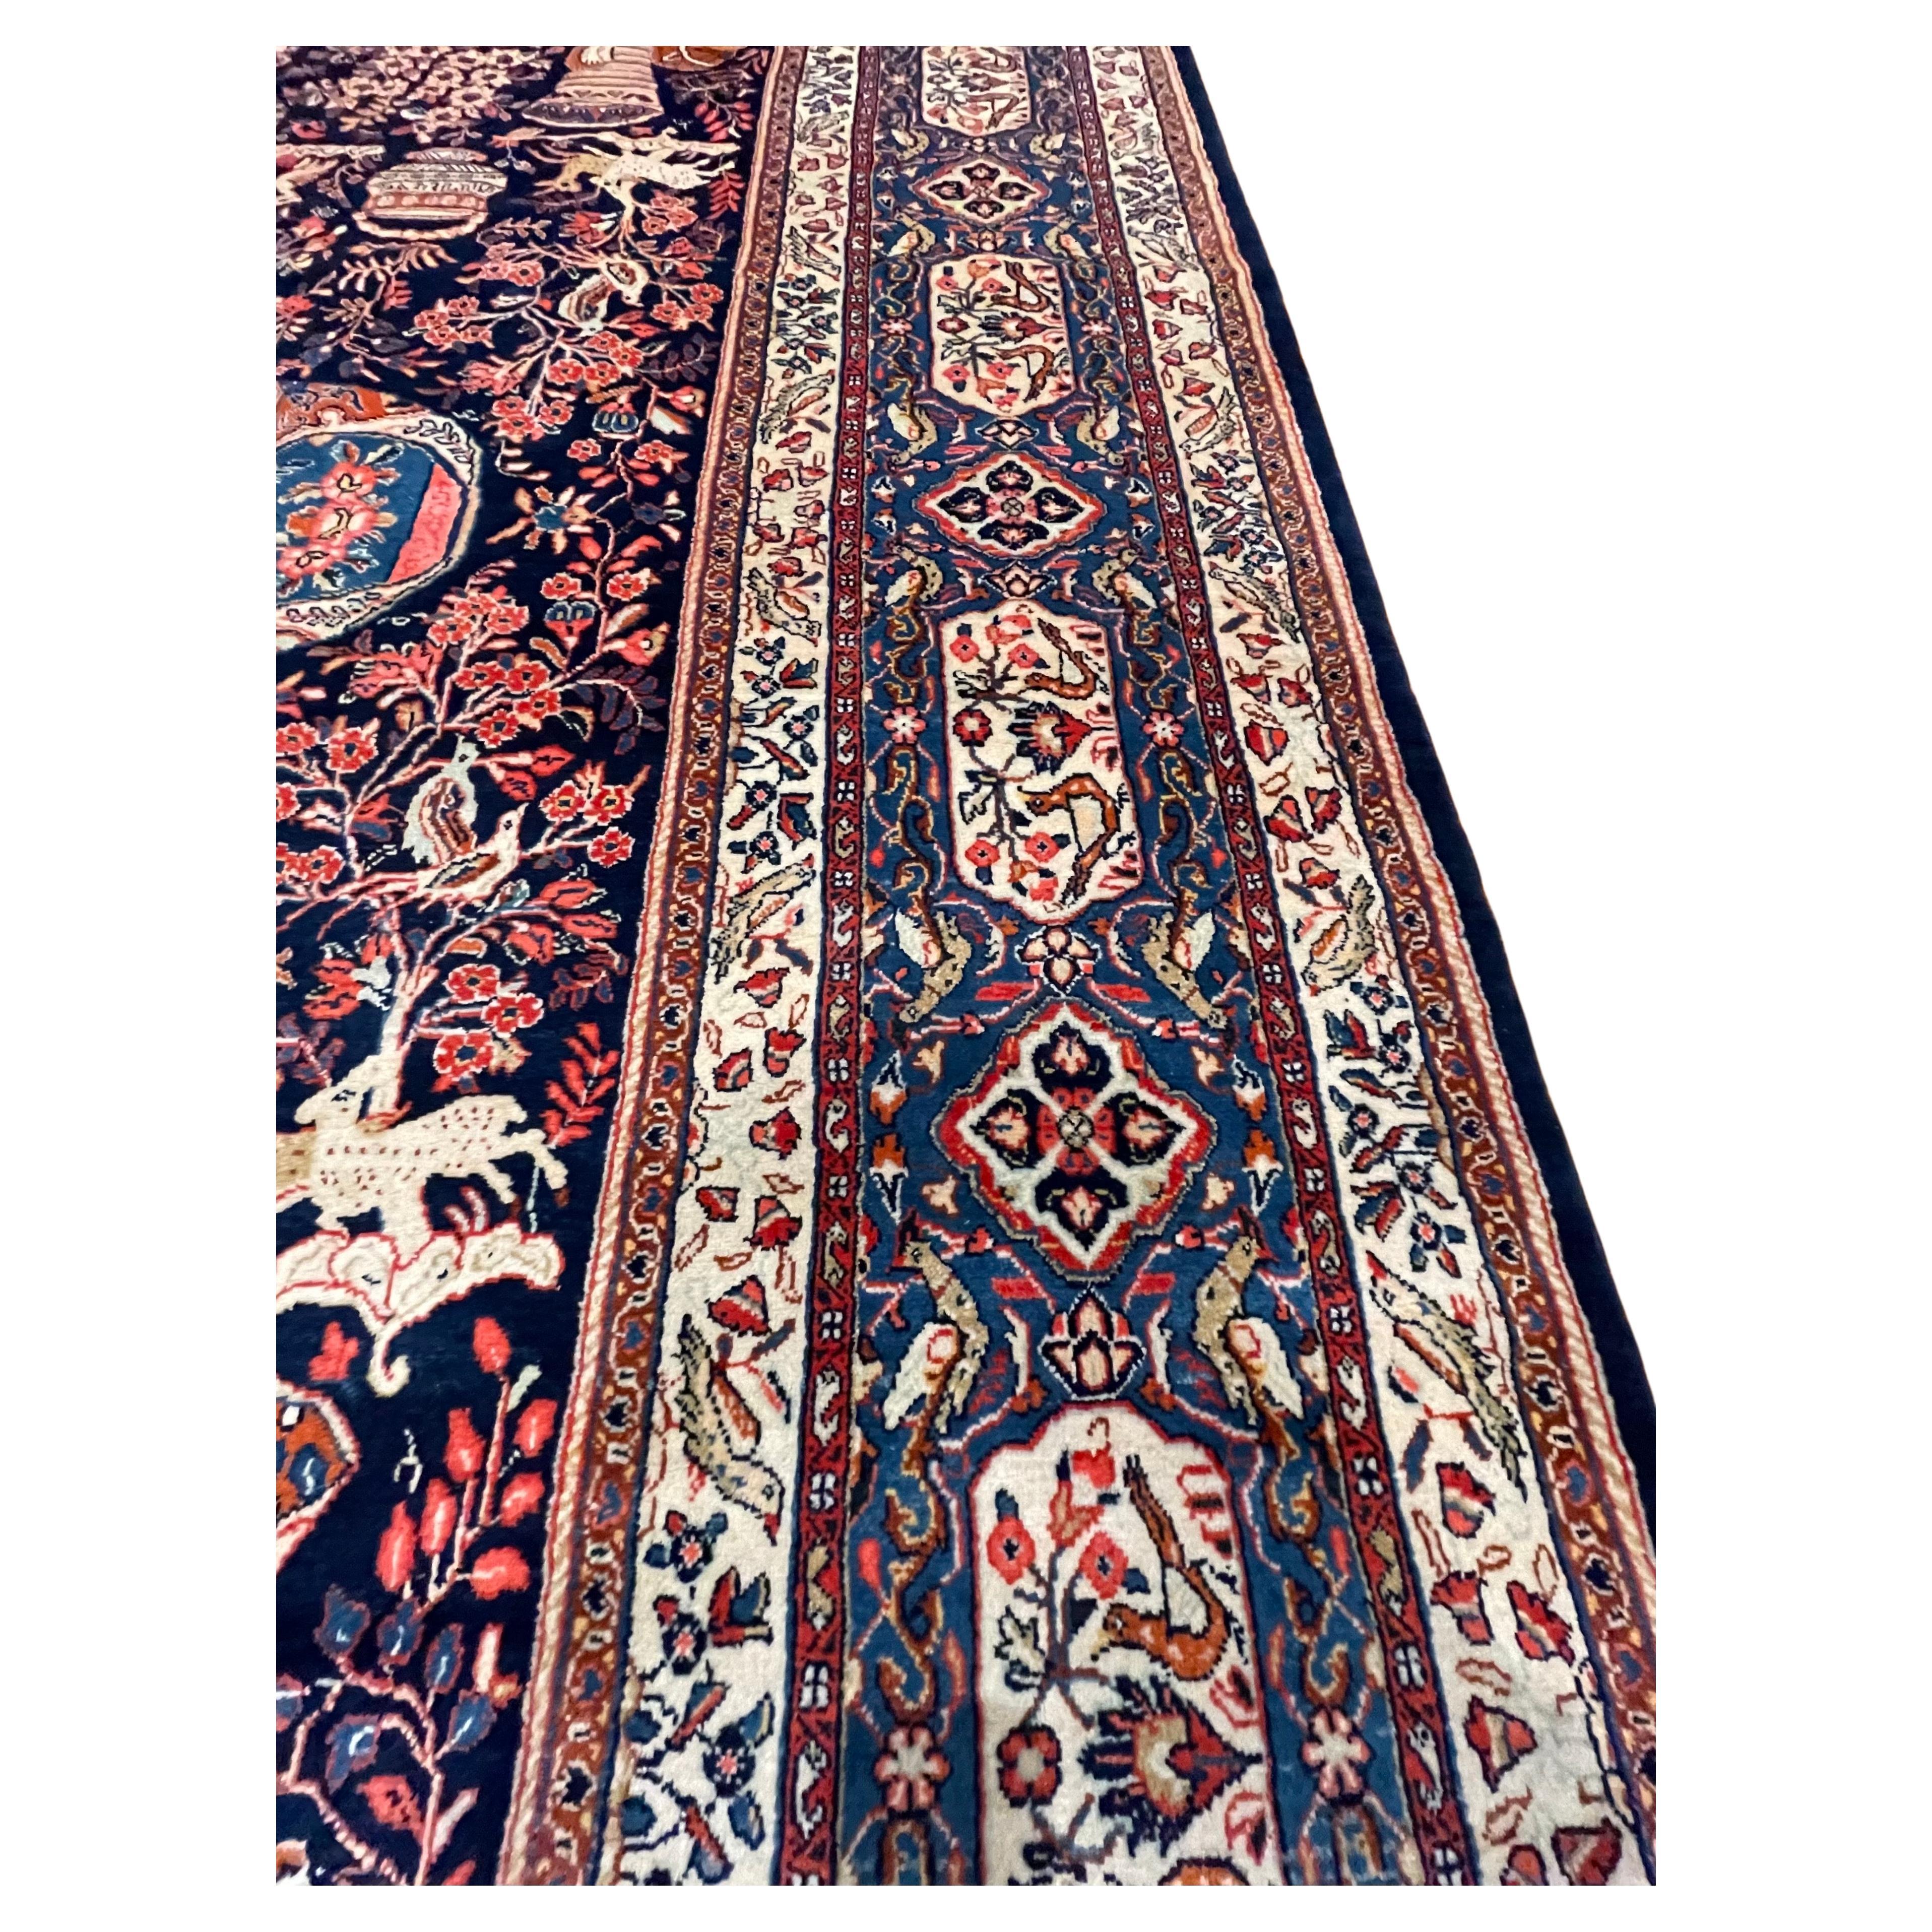 Introducing an exquisite piece of artistry, this authentic hand-knotted Persian Sarouk rug embodies the timeless beauty and fine craftsmanship that define Persian rug-making tradition. This Sarouk rug features a wool pile intricately woven on a